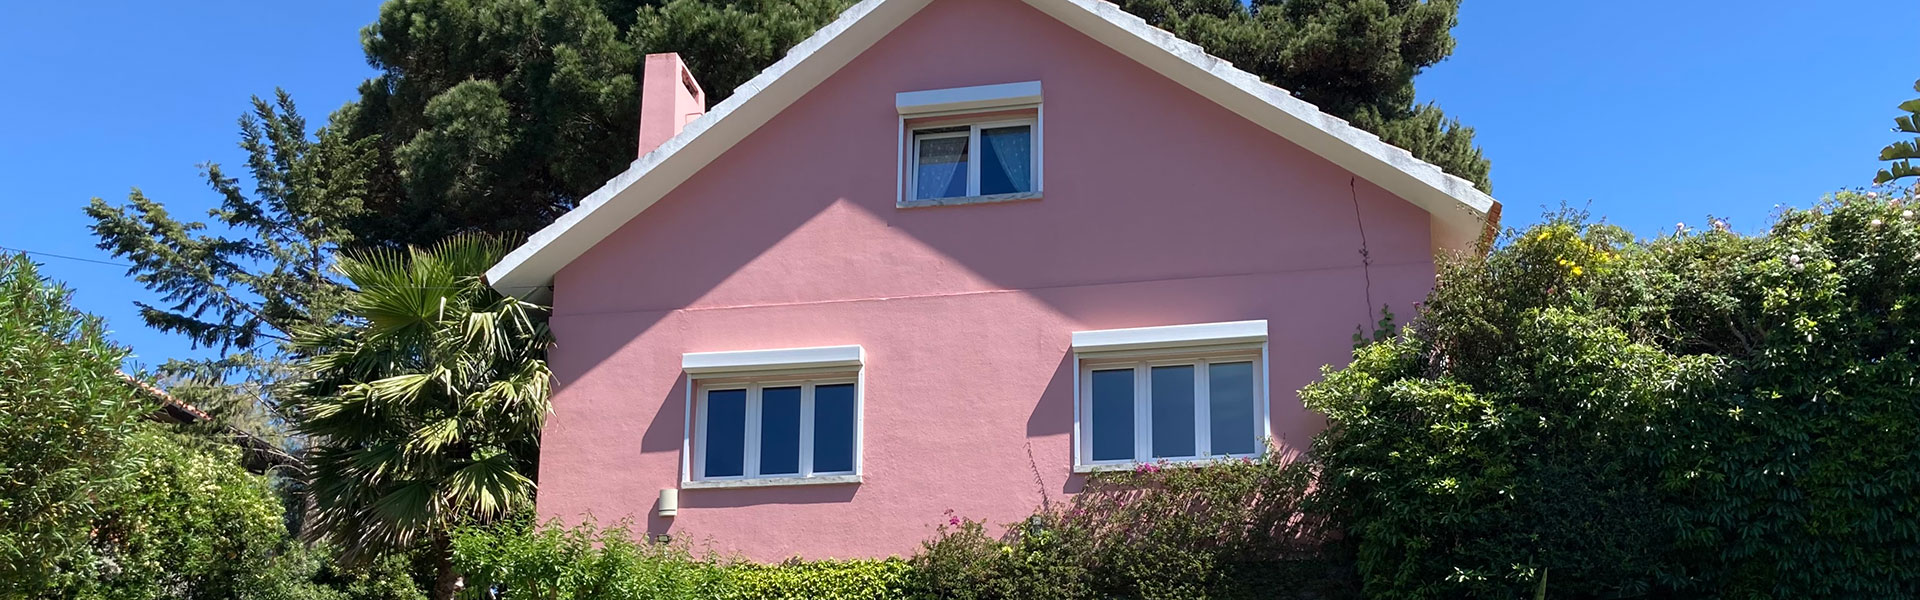 The Pink House in Estoril